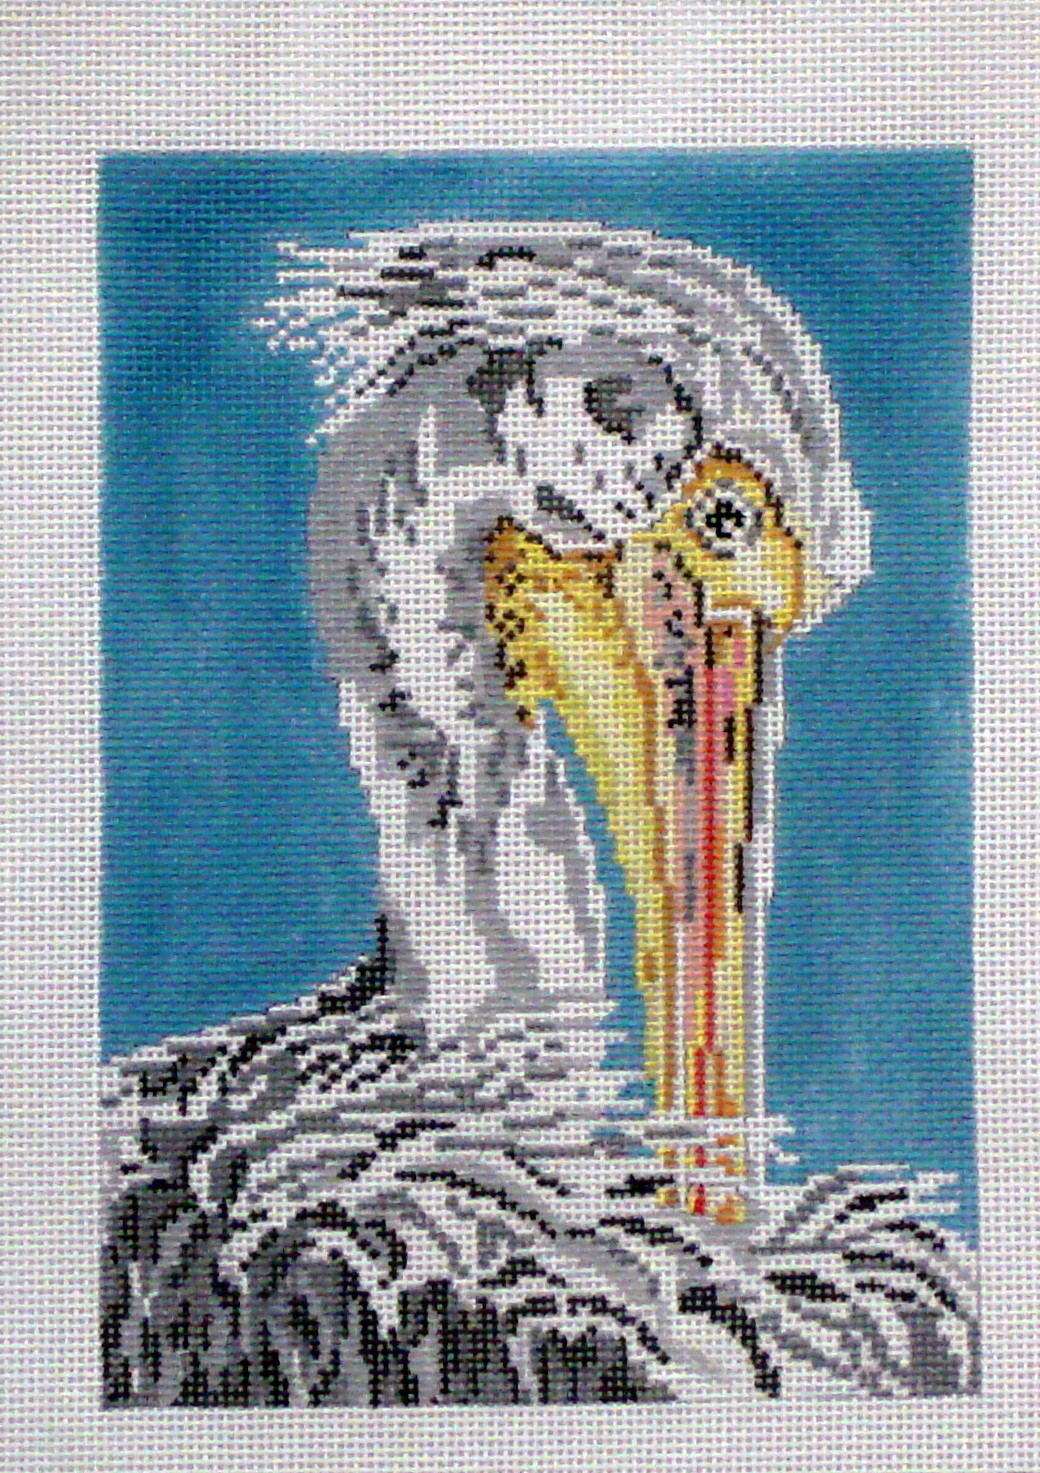 White Pelican (Handpainted by Needle Crossings)*Product may take longer than usual to arrive*